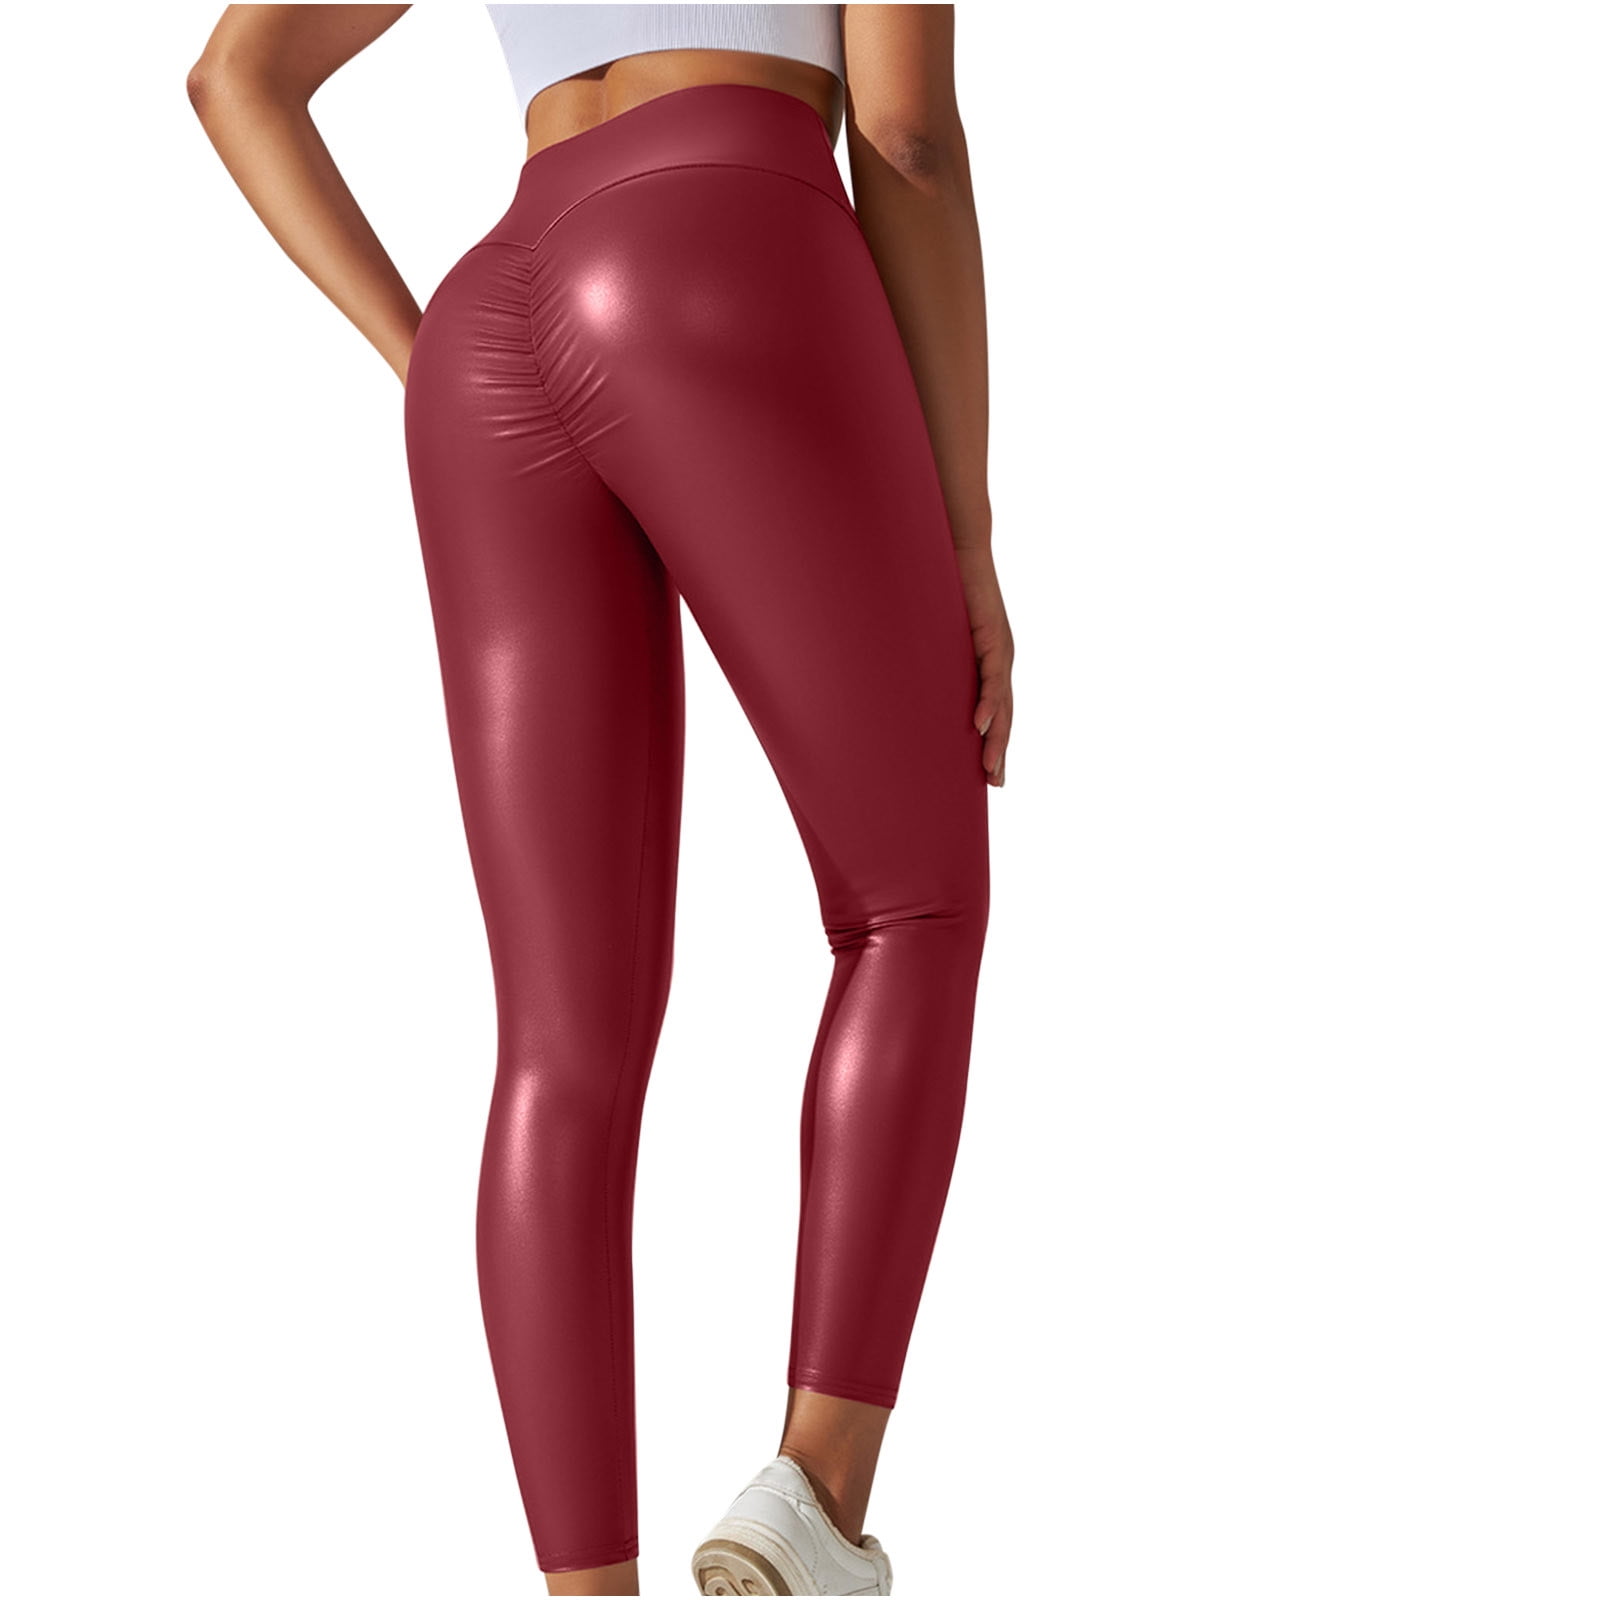 Ayolanni Leather Leggings for Women Ladies High Waist Sports Pants Yoga  Fitness Skin-Friendly Nude Double-Sided Hip-Lifting Sports Trousers 